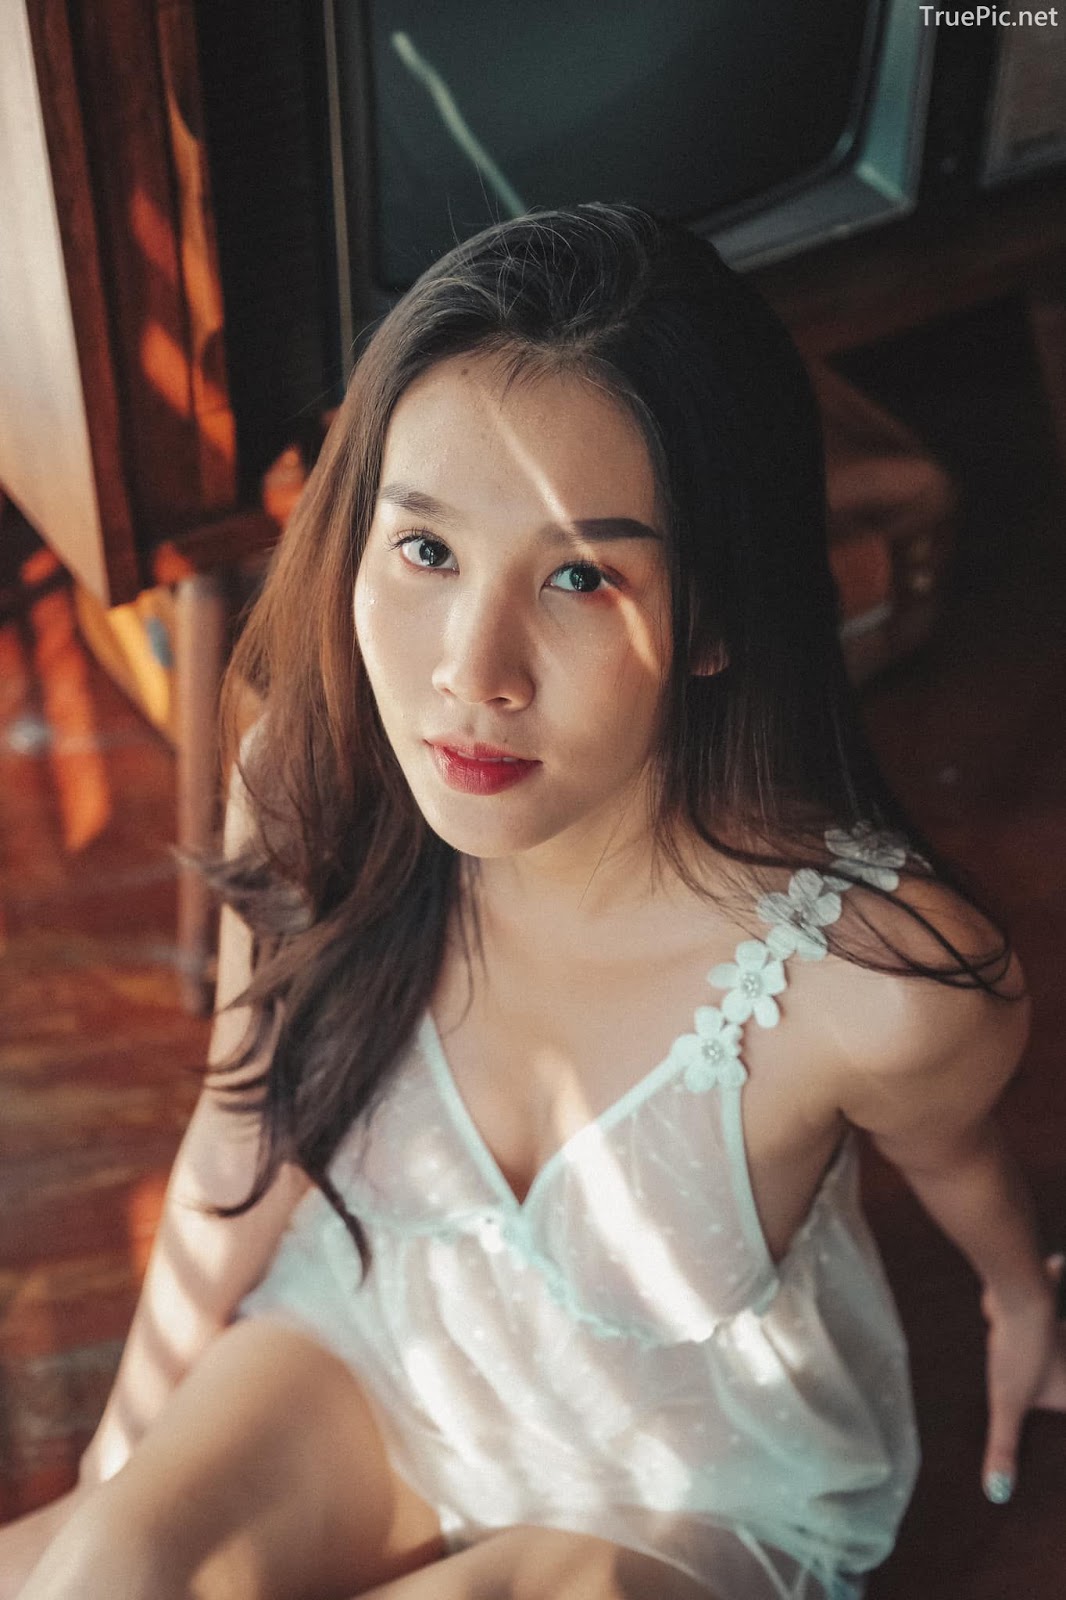 Thailand model - Ssomch Tanass - Sexy in Transparent Ultra-thin Lingerie - TruePic.net - Picture 24